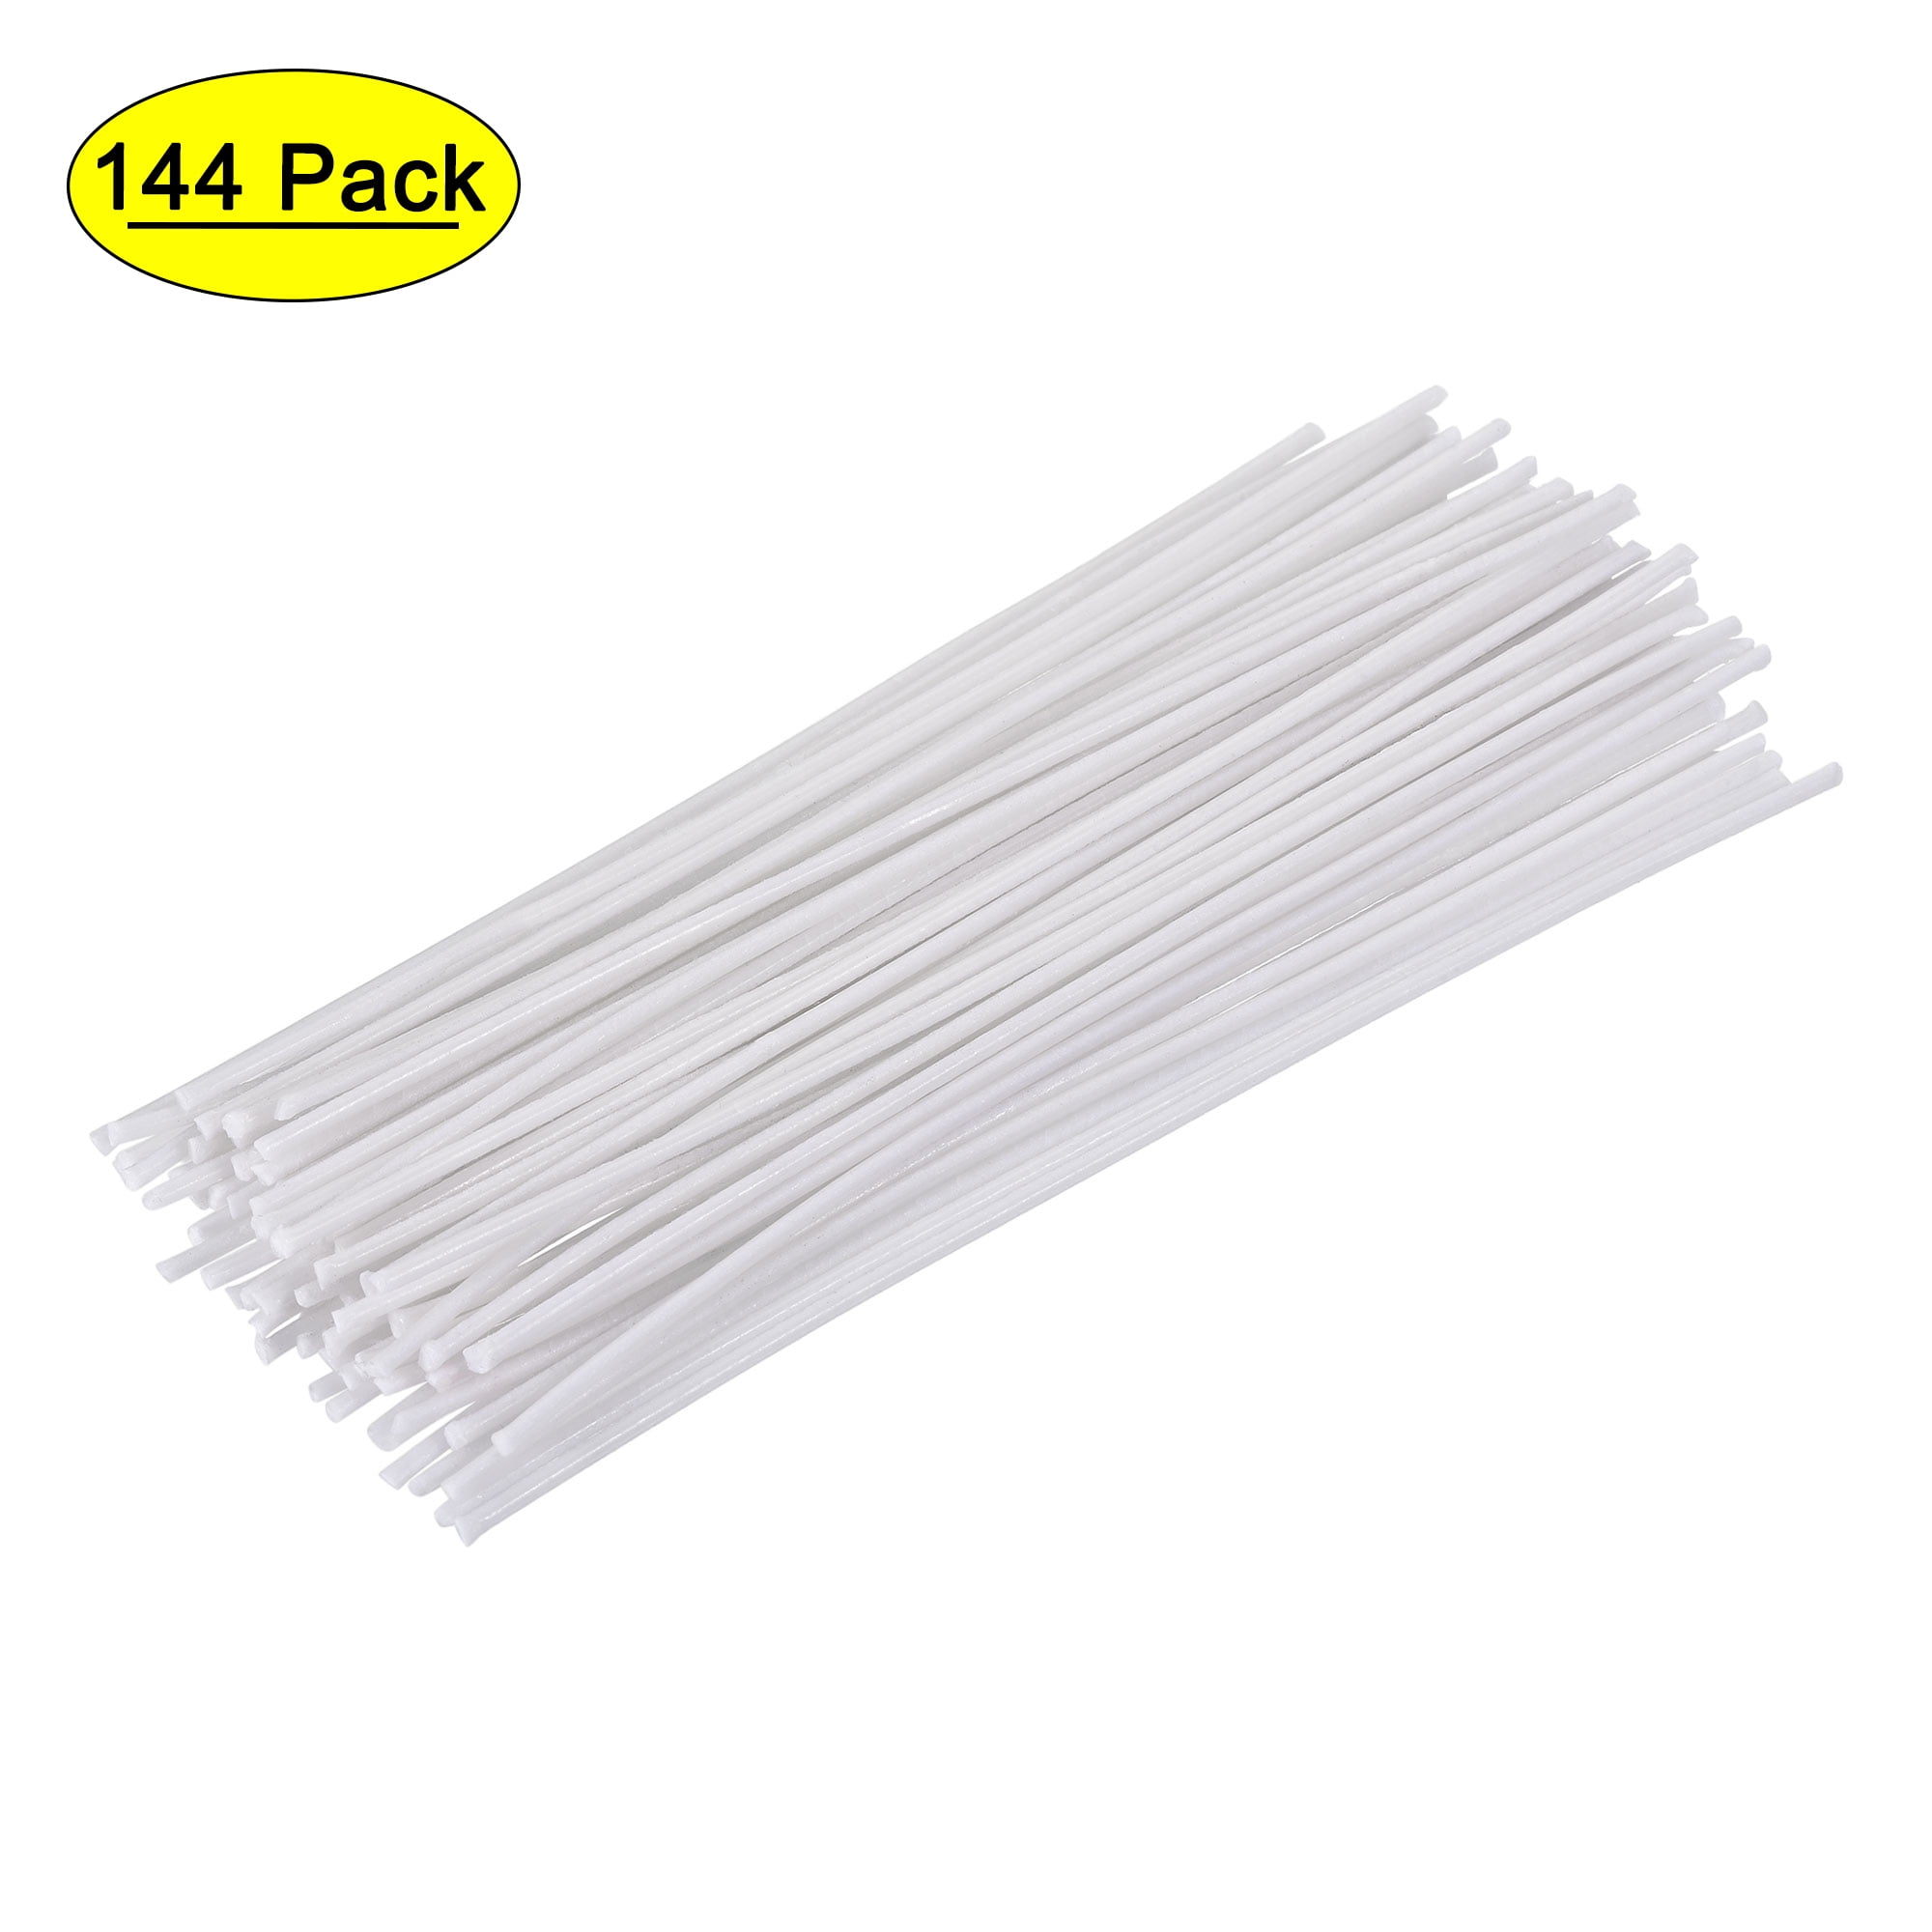 10/20/50Pcs Wooden Candles Core Wick Candle Making Supplies W/ Iron DIY 